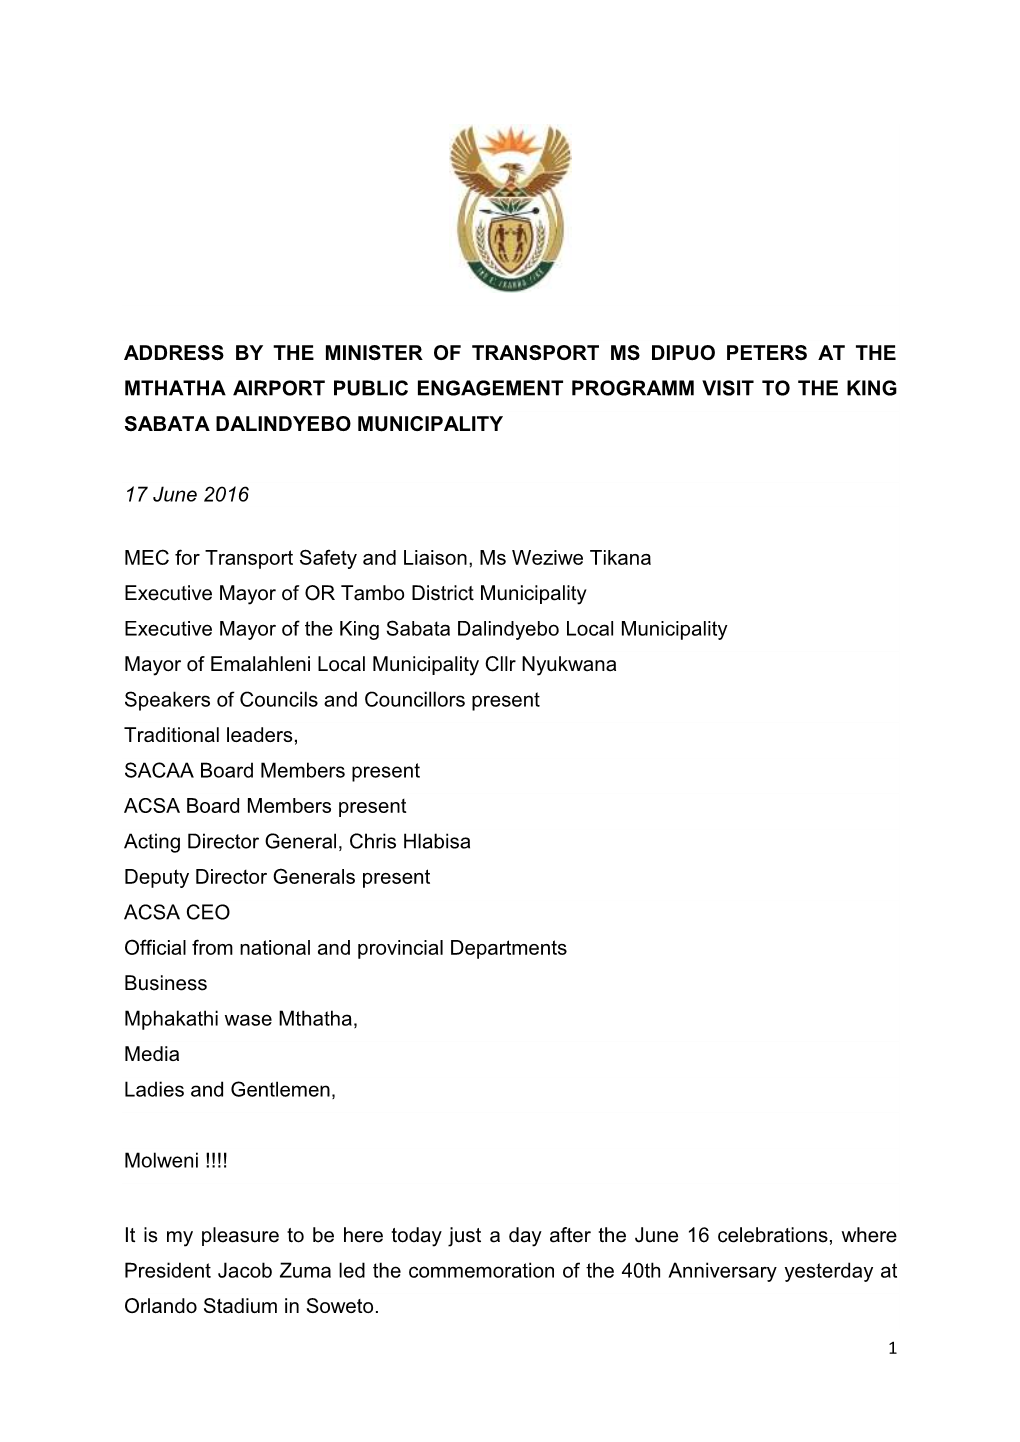 Address by the Minister of Transport Ms Dipuo Peters at the Mthatha Airport Public Engagement Programm Visit to the King Sabata Dalindyebo Municipality